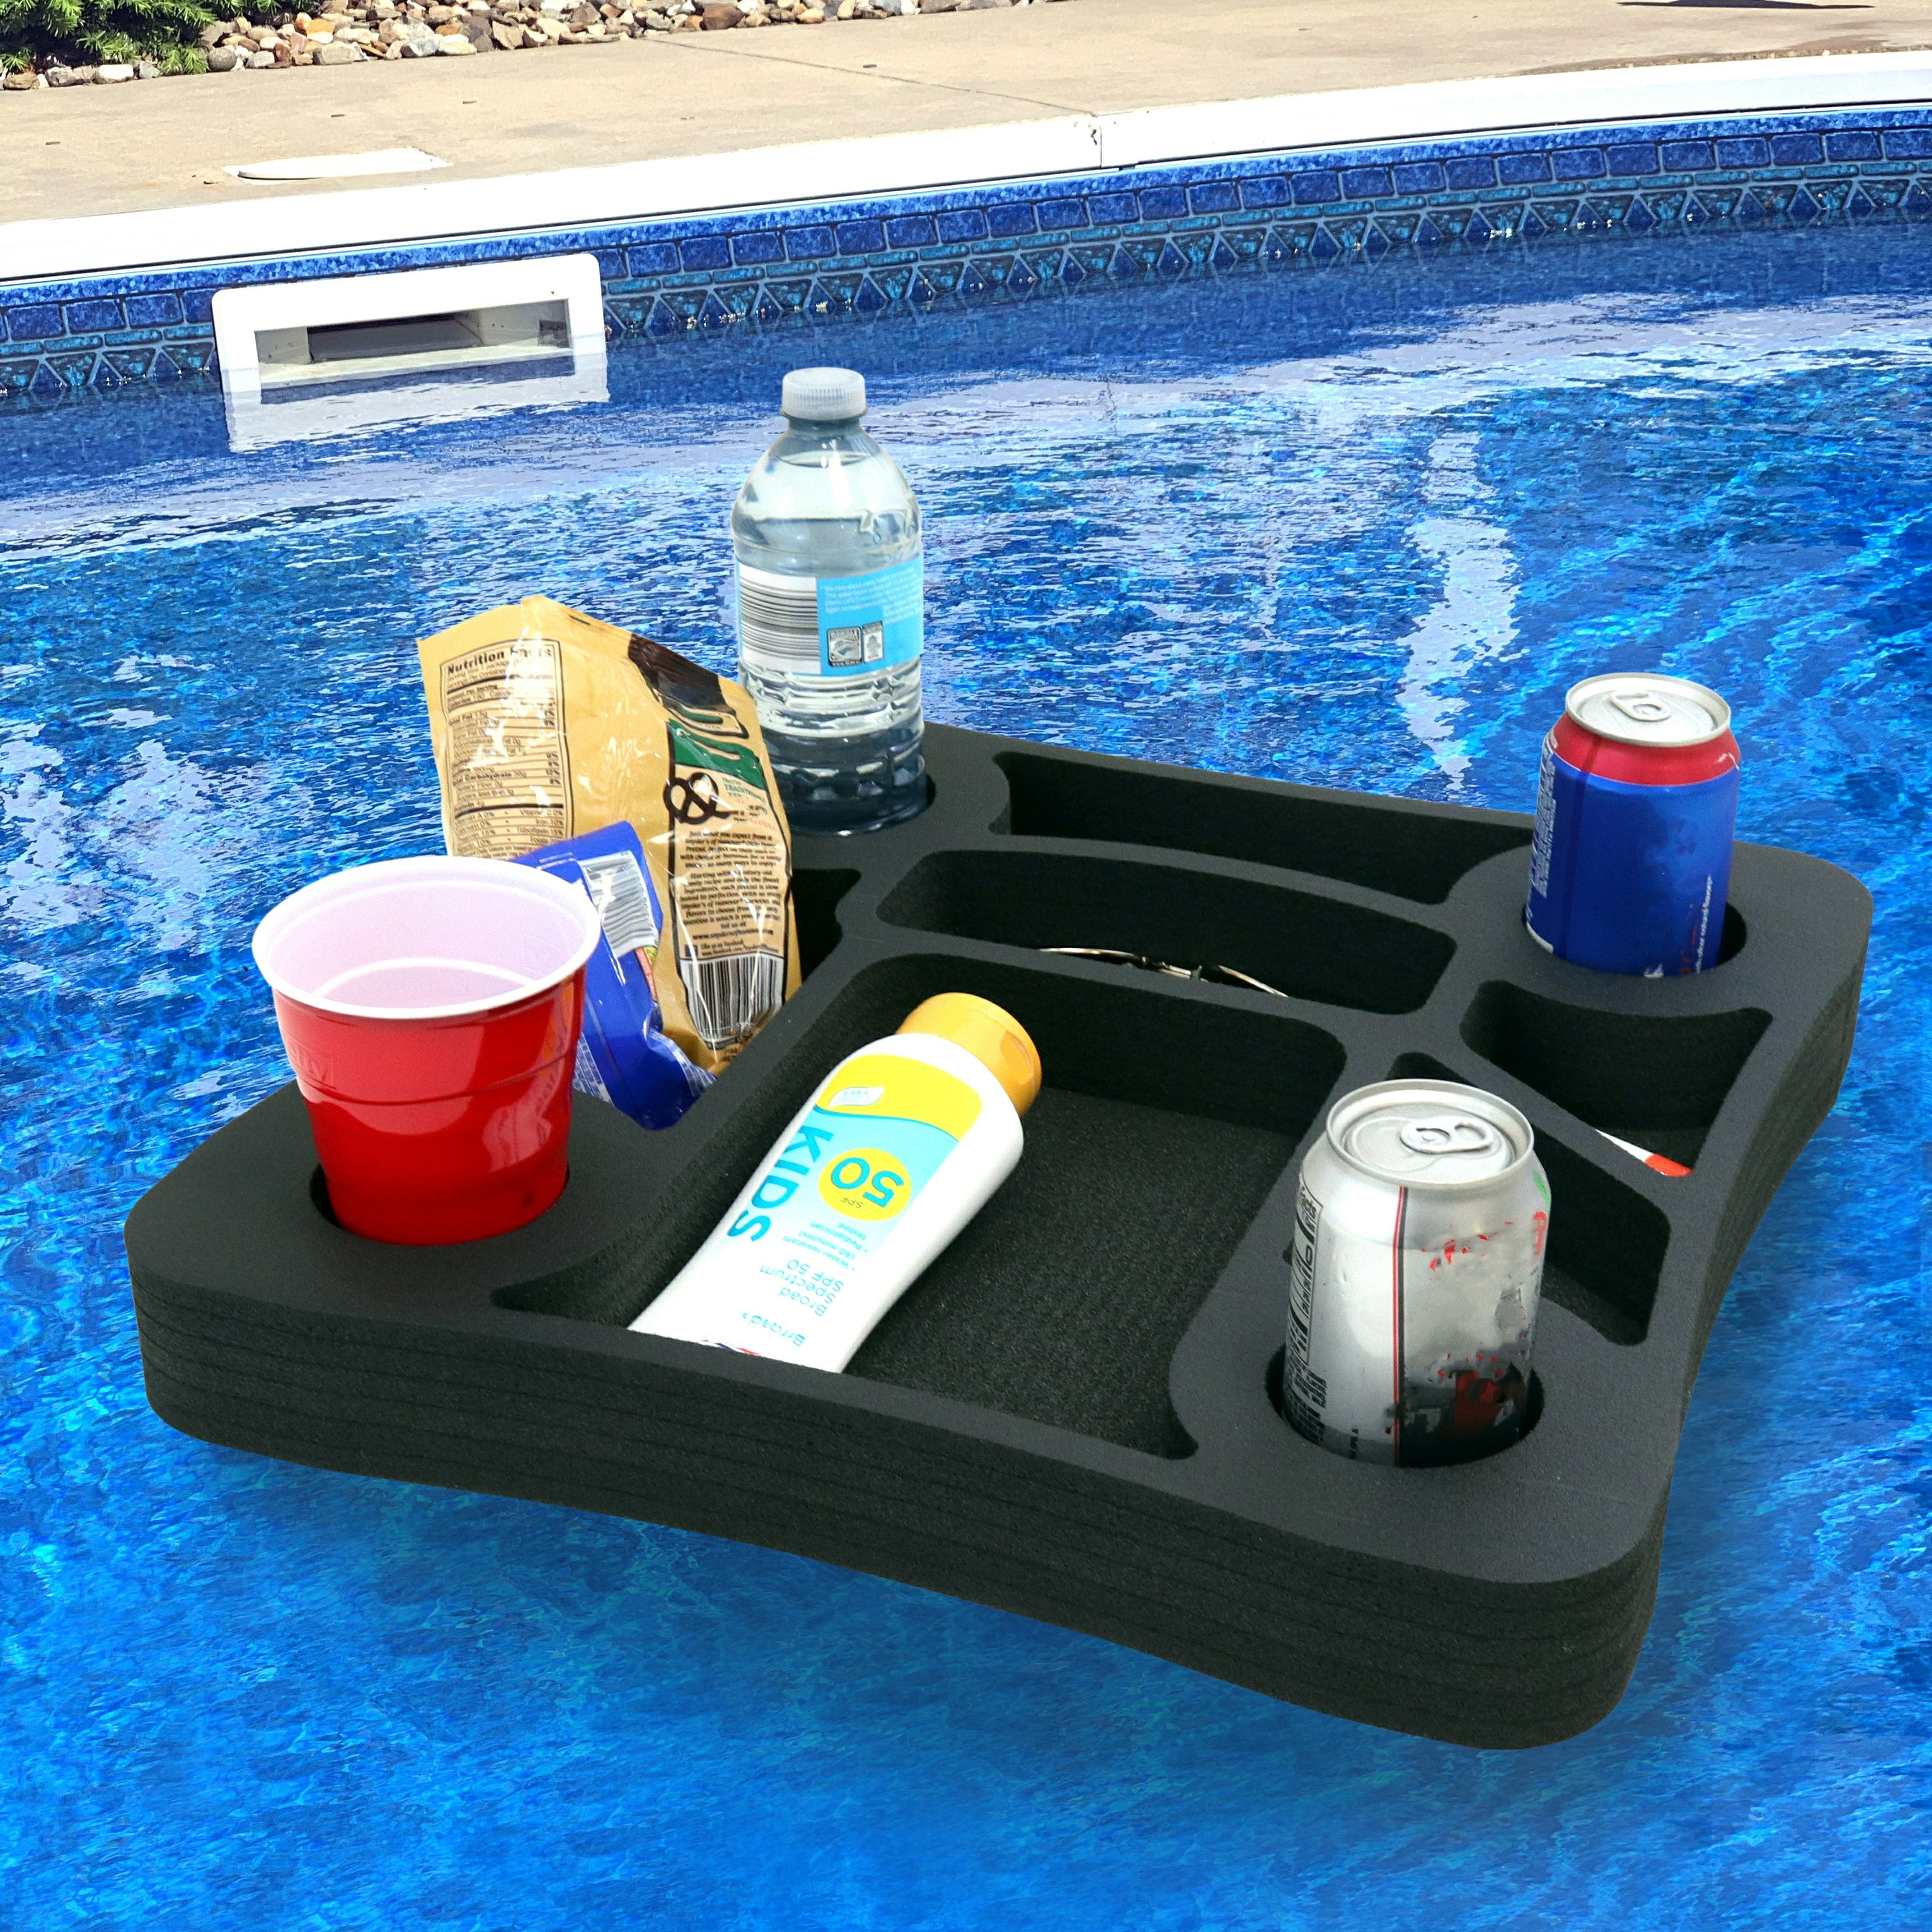 FEEBRIA Pool Cup Holder,Floating Drink Holder for Pools & Hot Tub Versatile & Portable Pool Accessories